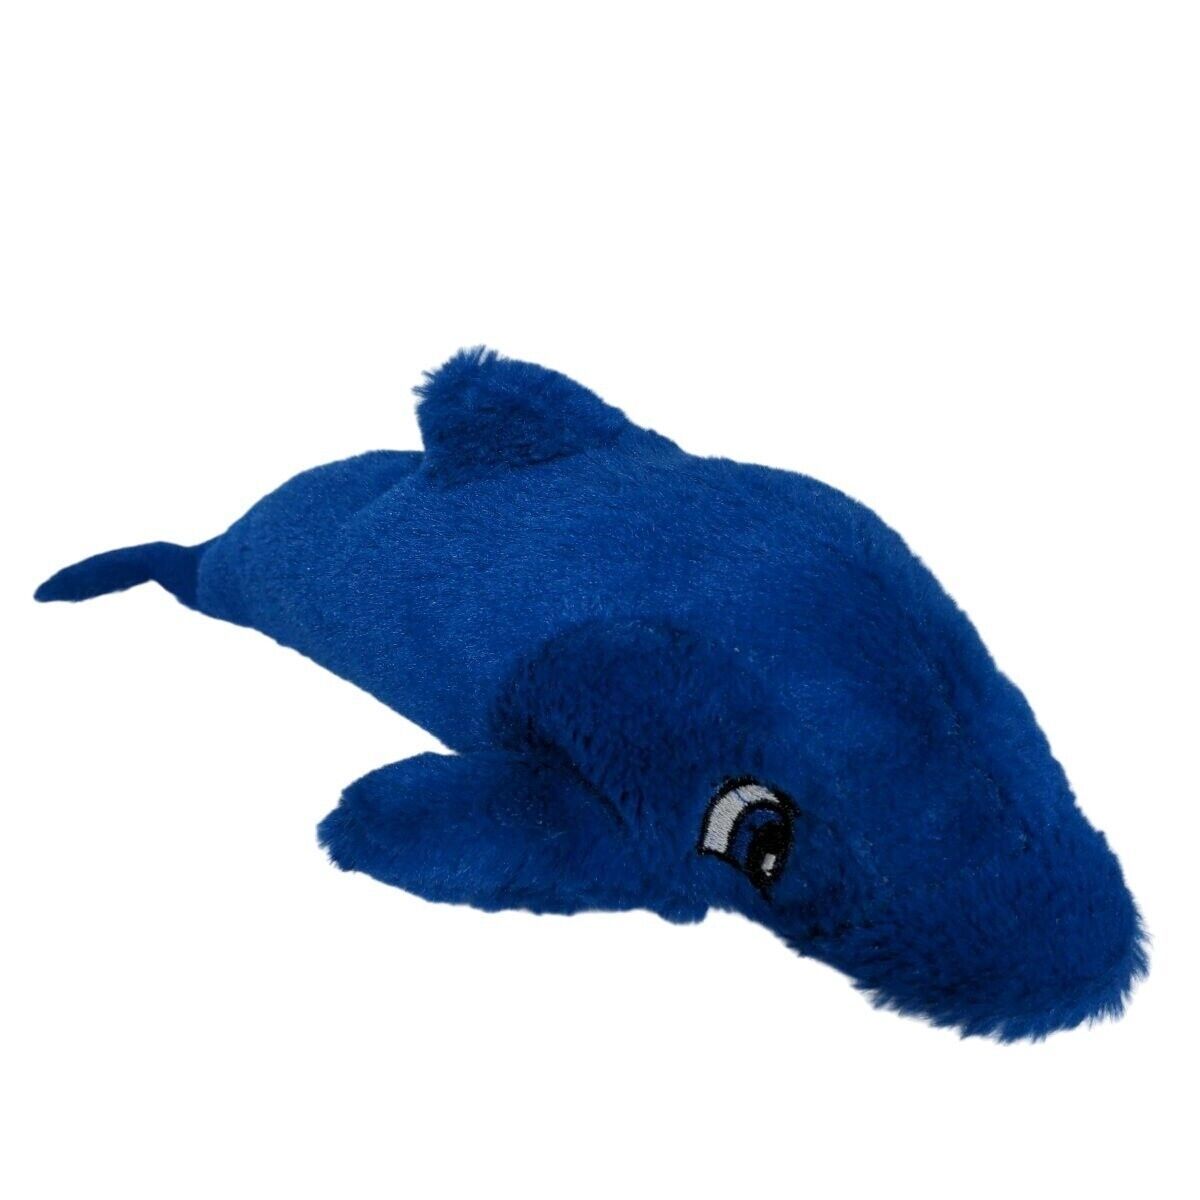 Primary image for National Prize and Toy Blue White Dolphin Plush Stuffed Animal 13"